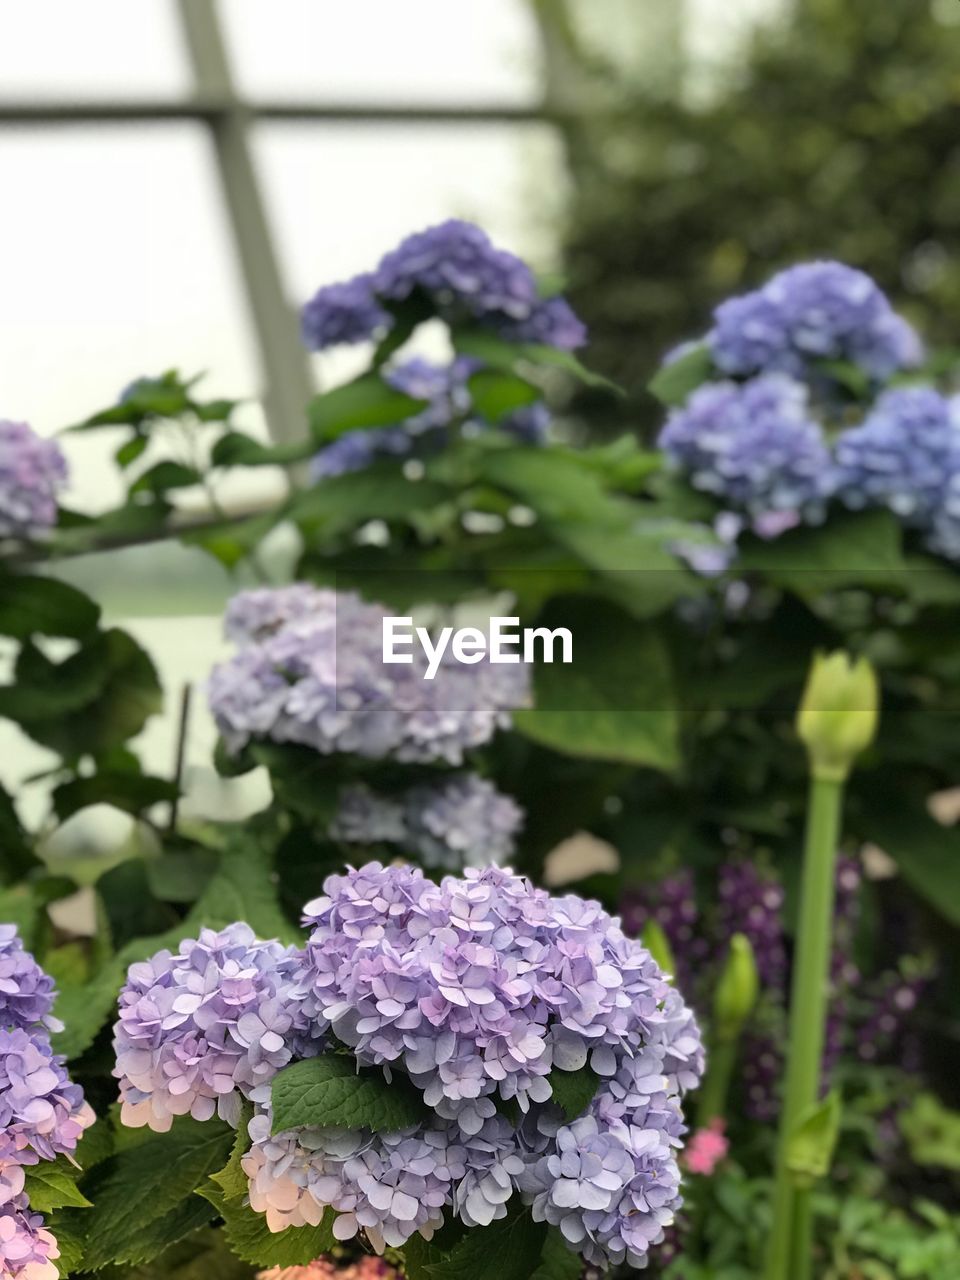 CLOSE-UP OF PURPLE HYDRANGEA BLOOMING OUTDOORS